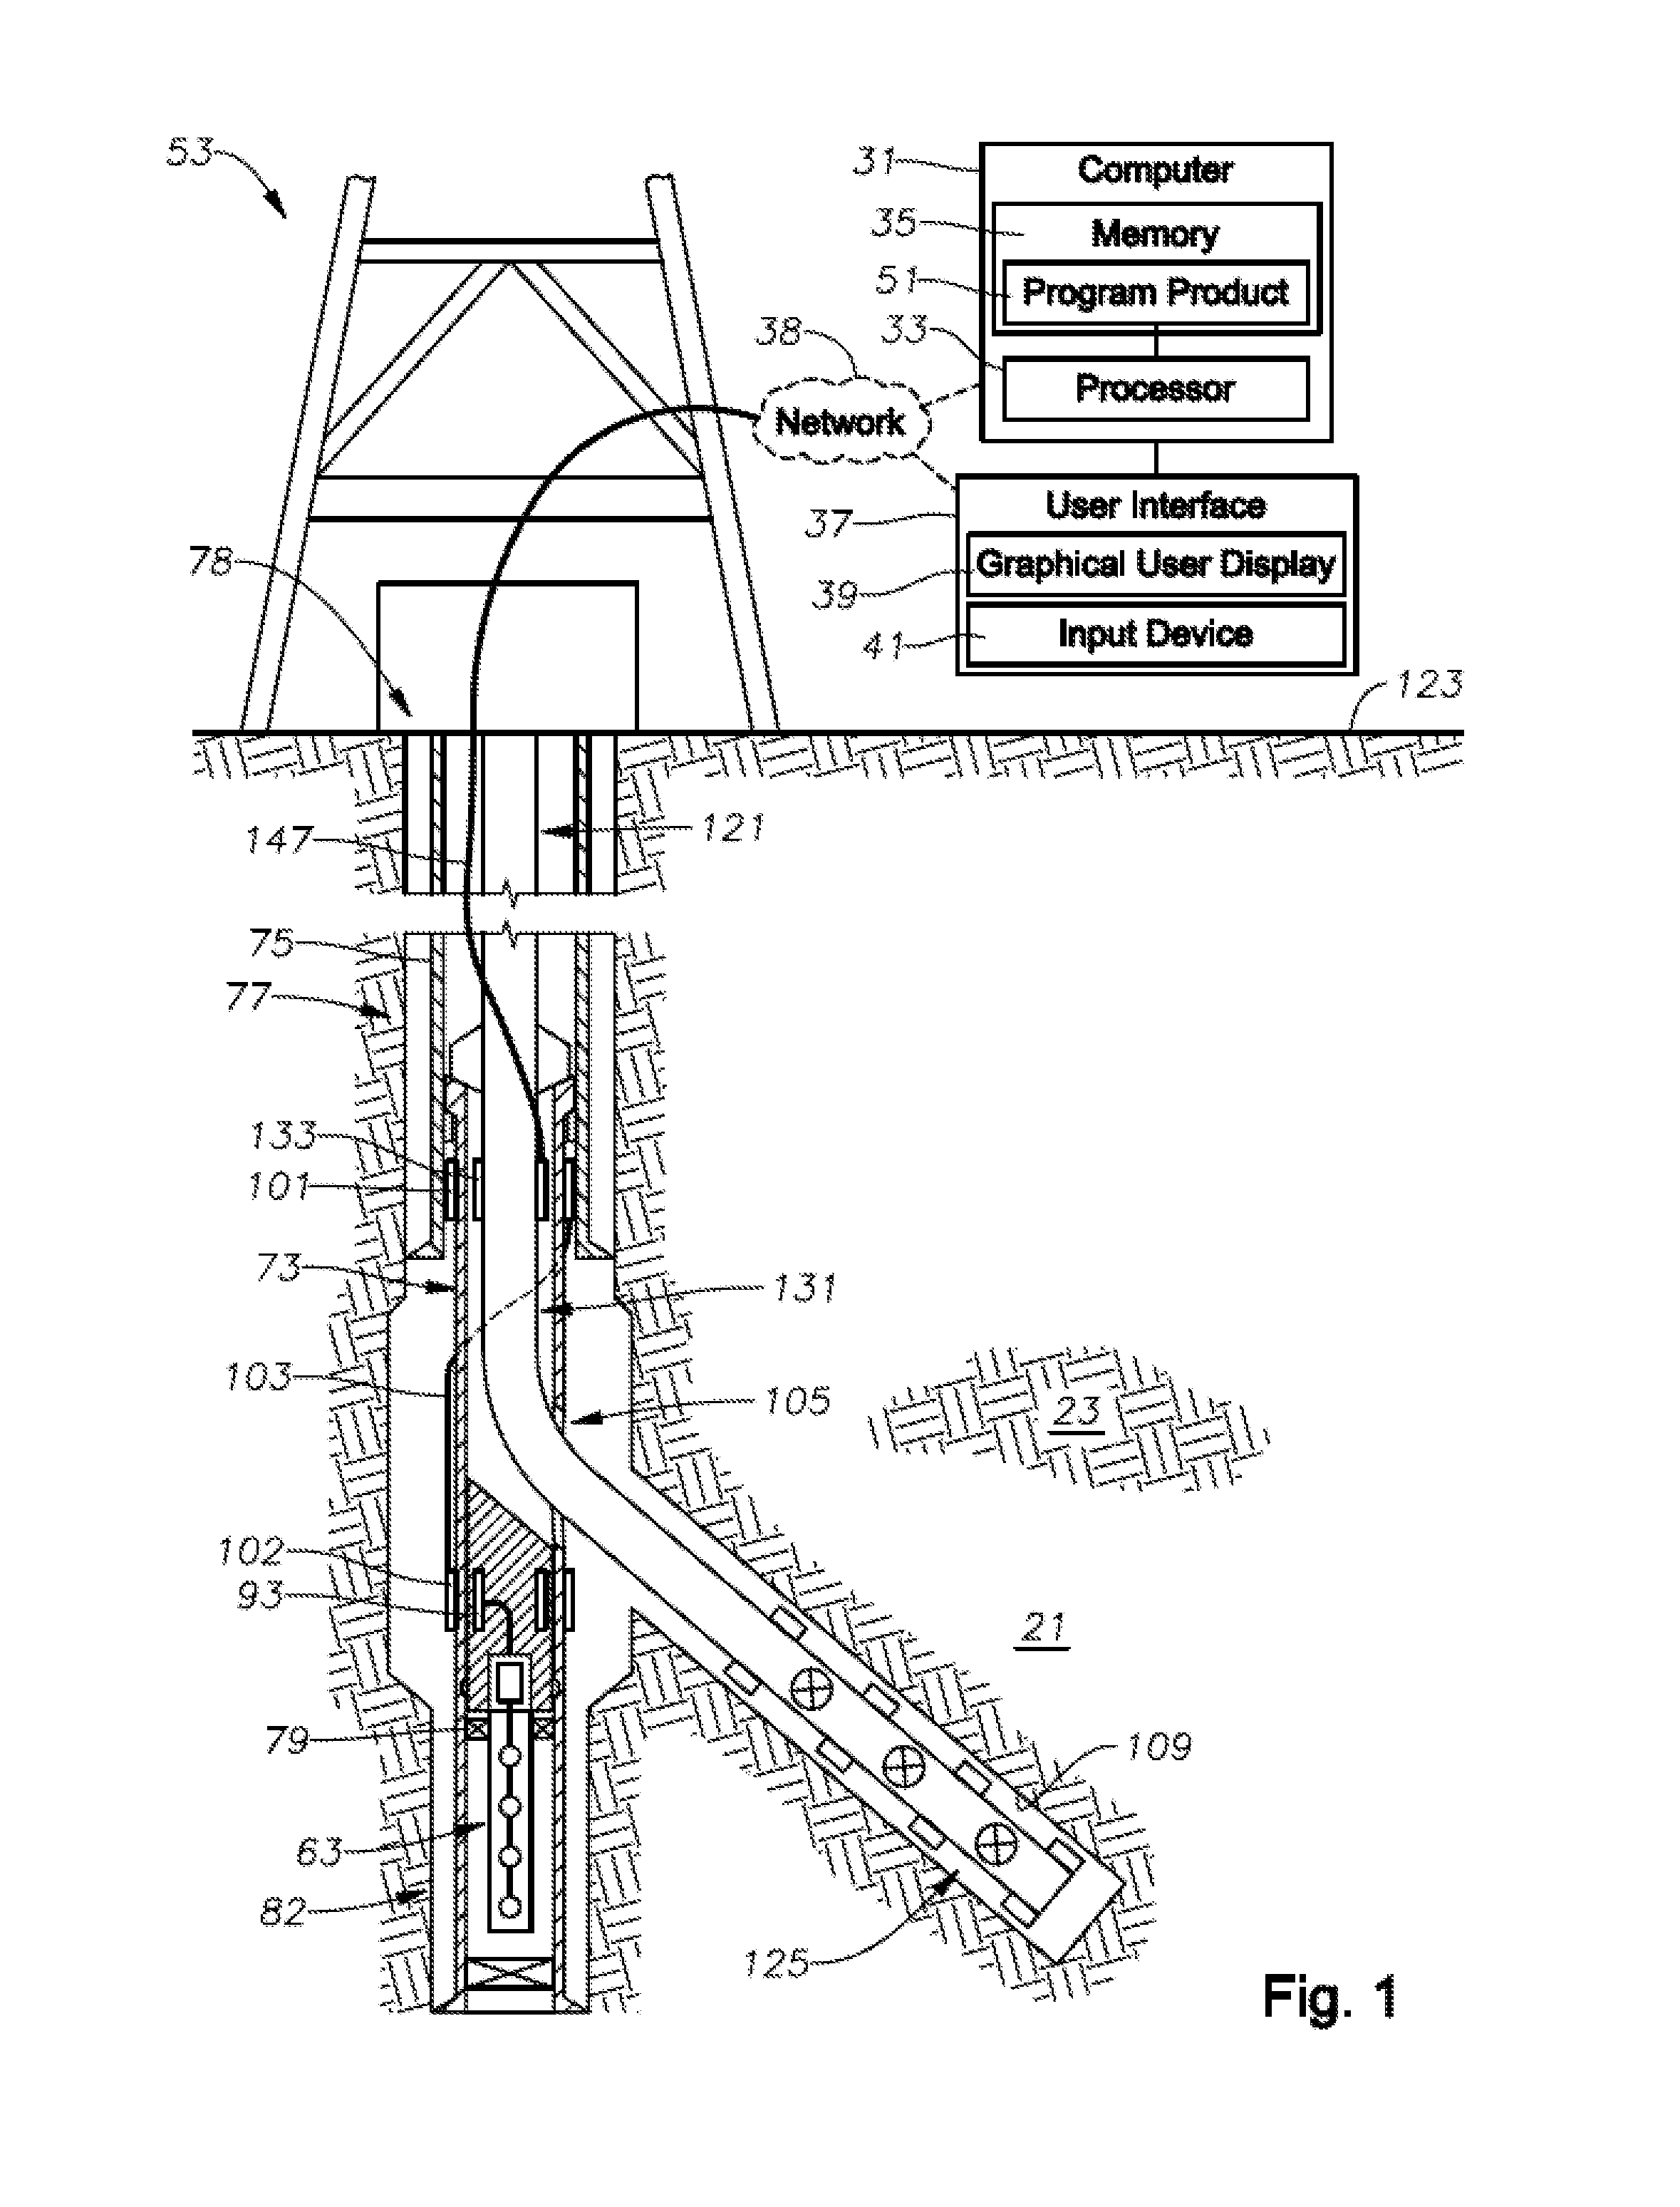 System For Real-Time Monitoring and Transmitting Hydraulic Fracture Seismic Events to Surface Using the Pilot Hole of the Treatment Well as the Monitoring Well